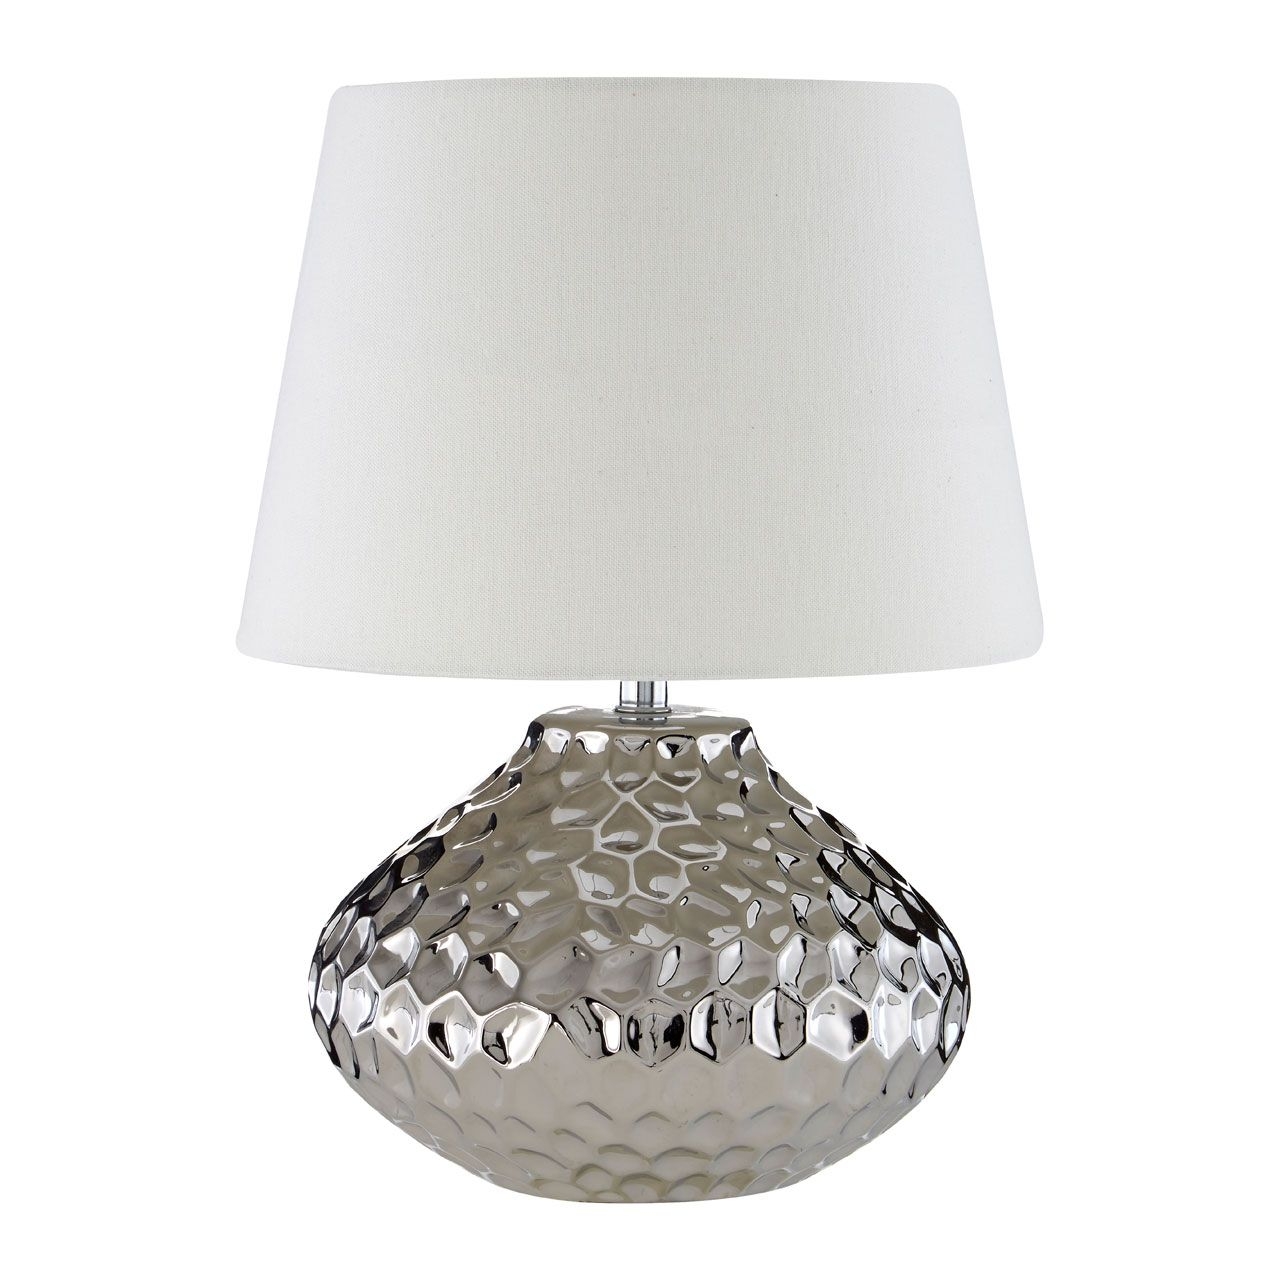 Jen Ivory Fabric Shade Table Lamp With Silver Ceramic Base